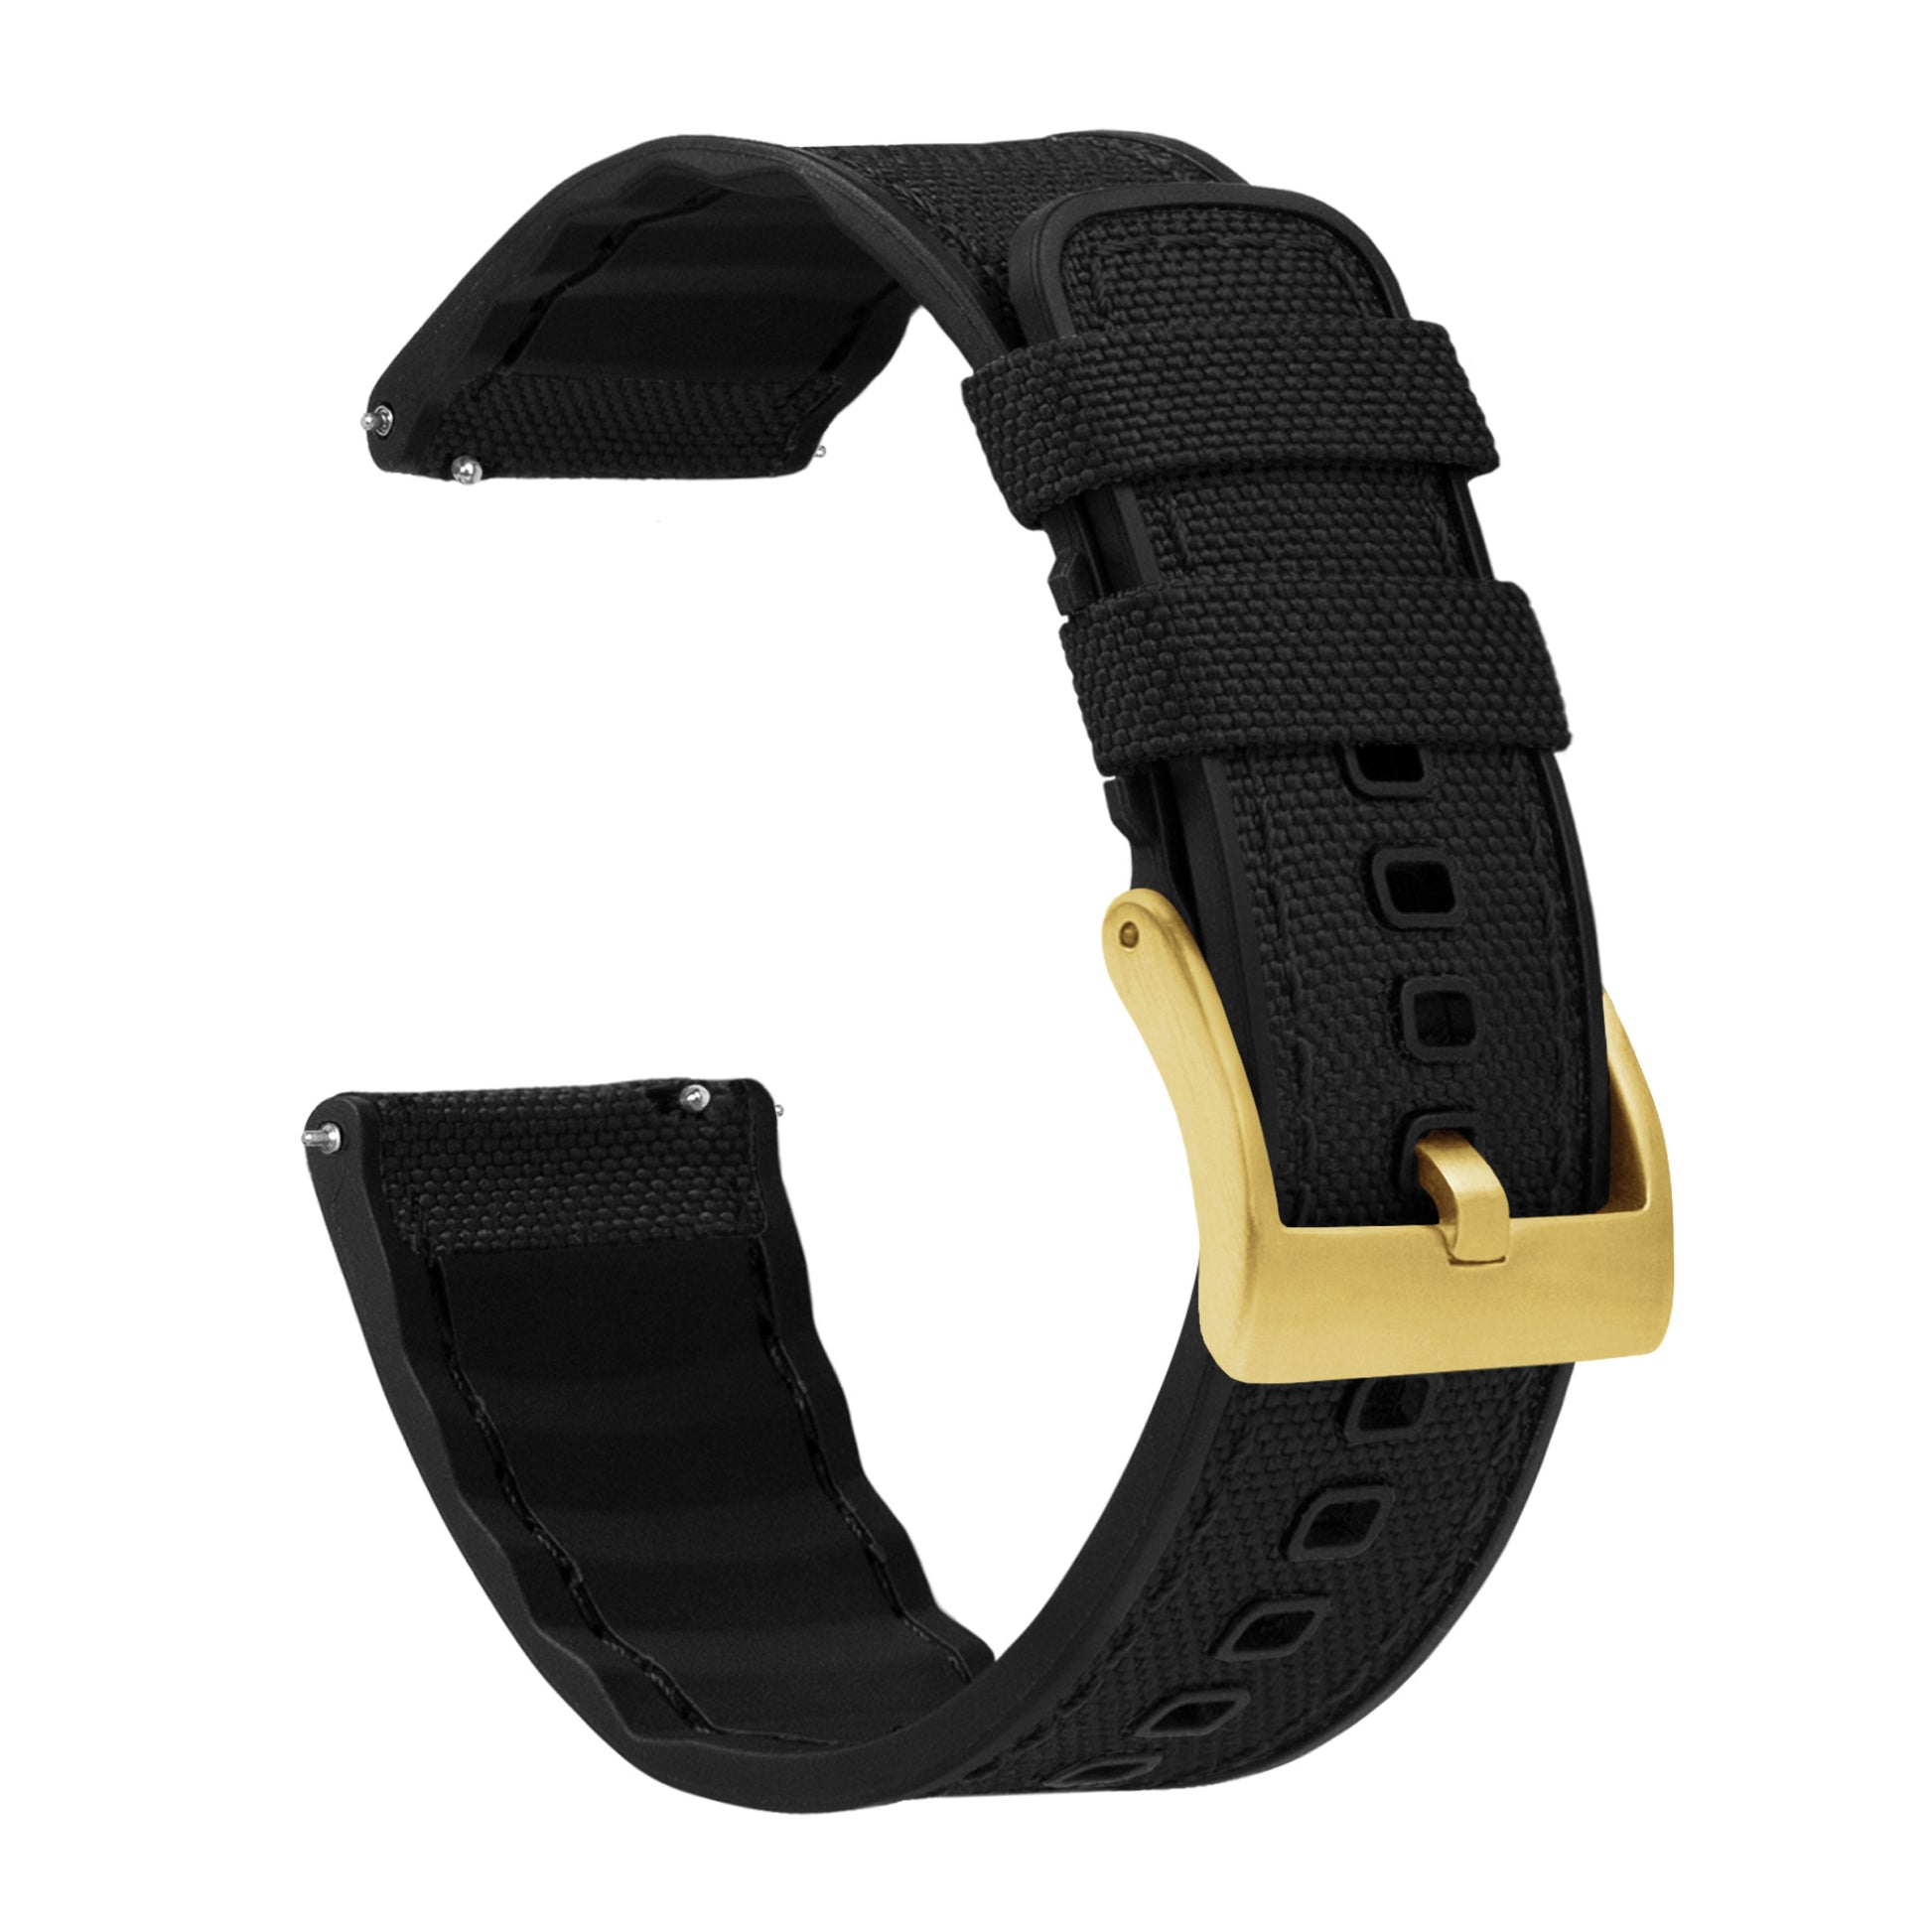 Barton Watch Bands with Integrated Quick Release Spring Bars- Cordura Fabric and Silicone- Cordura Fabric and Silicone Hybrid Watch Bands - Choice